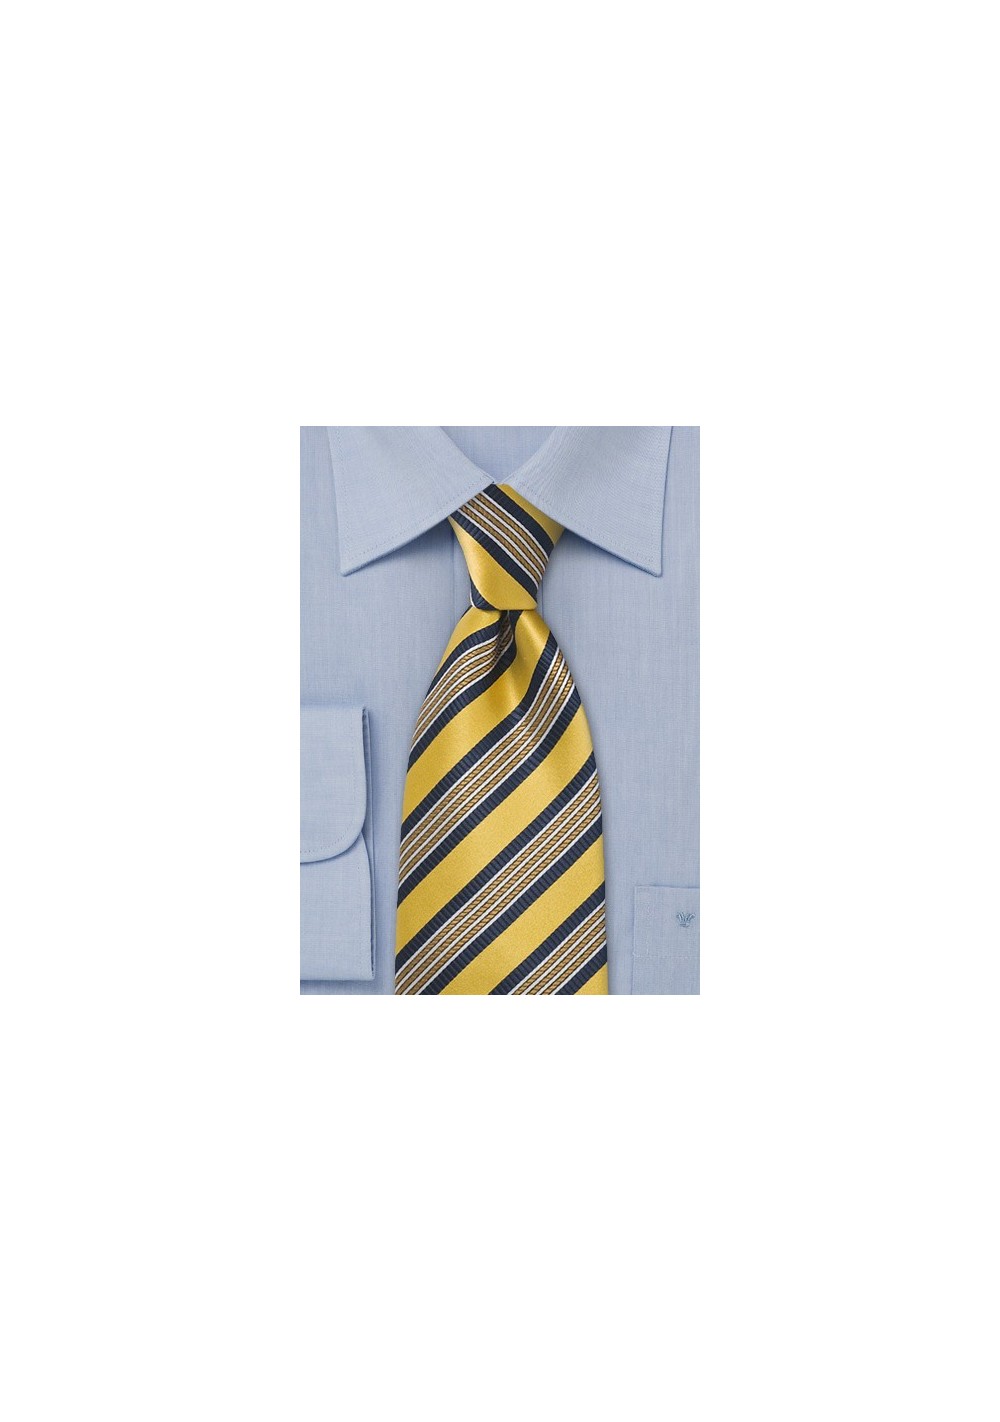 Yellow Gold Striped Tie